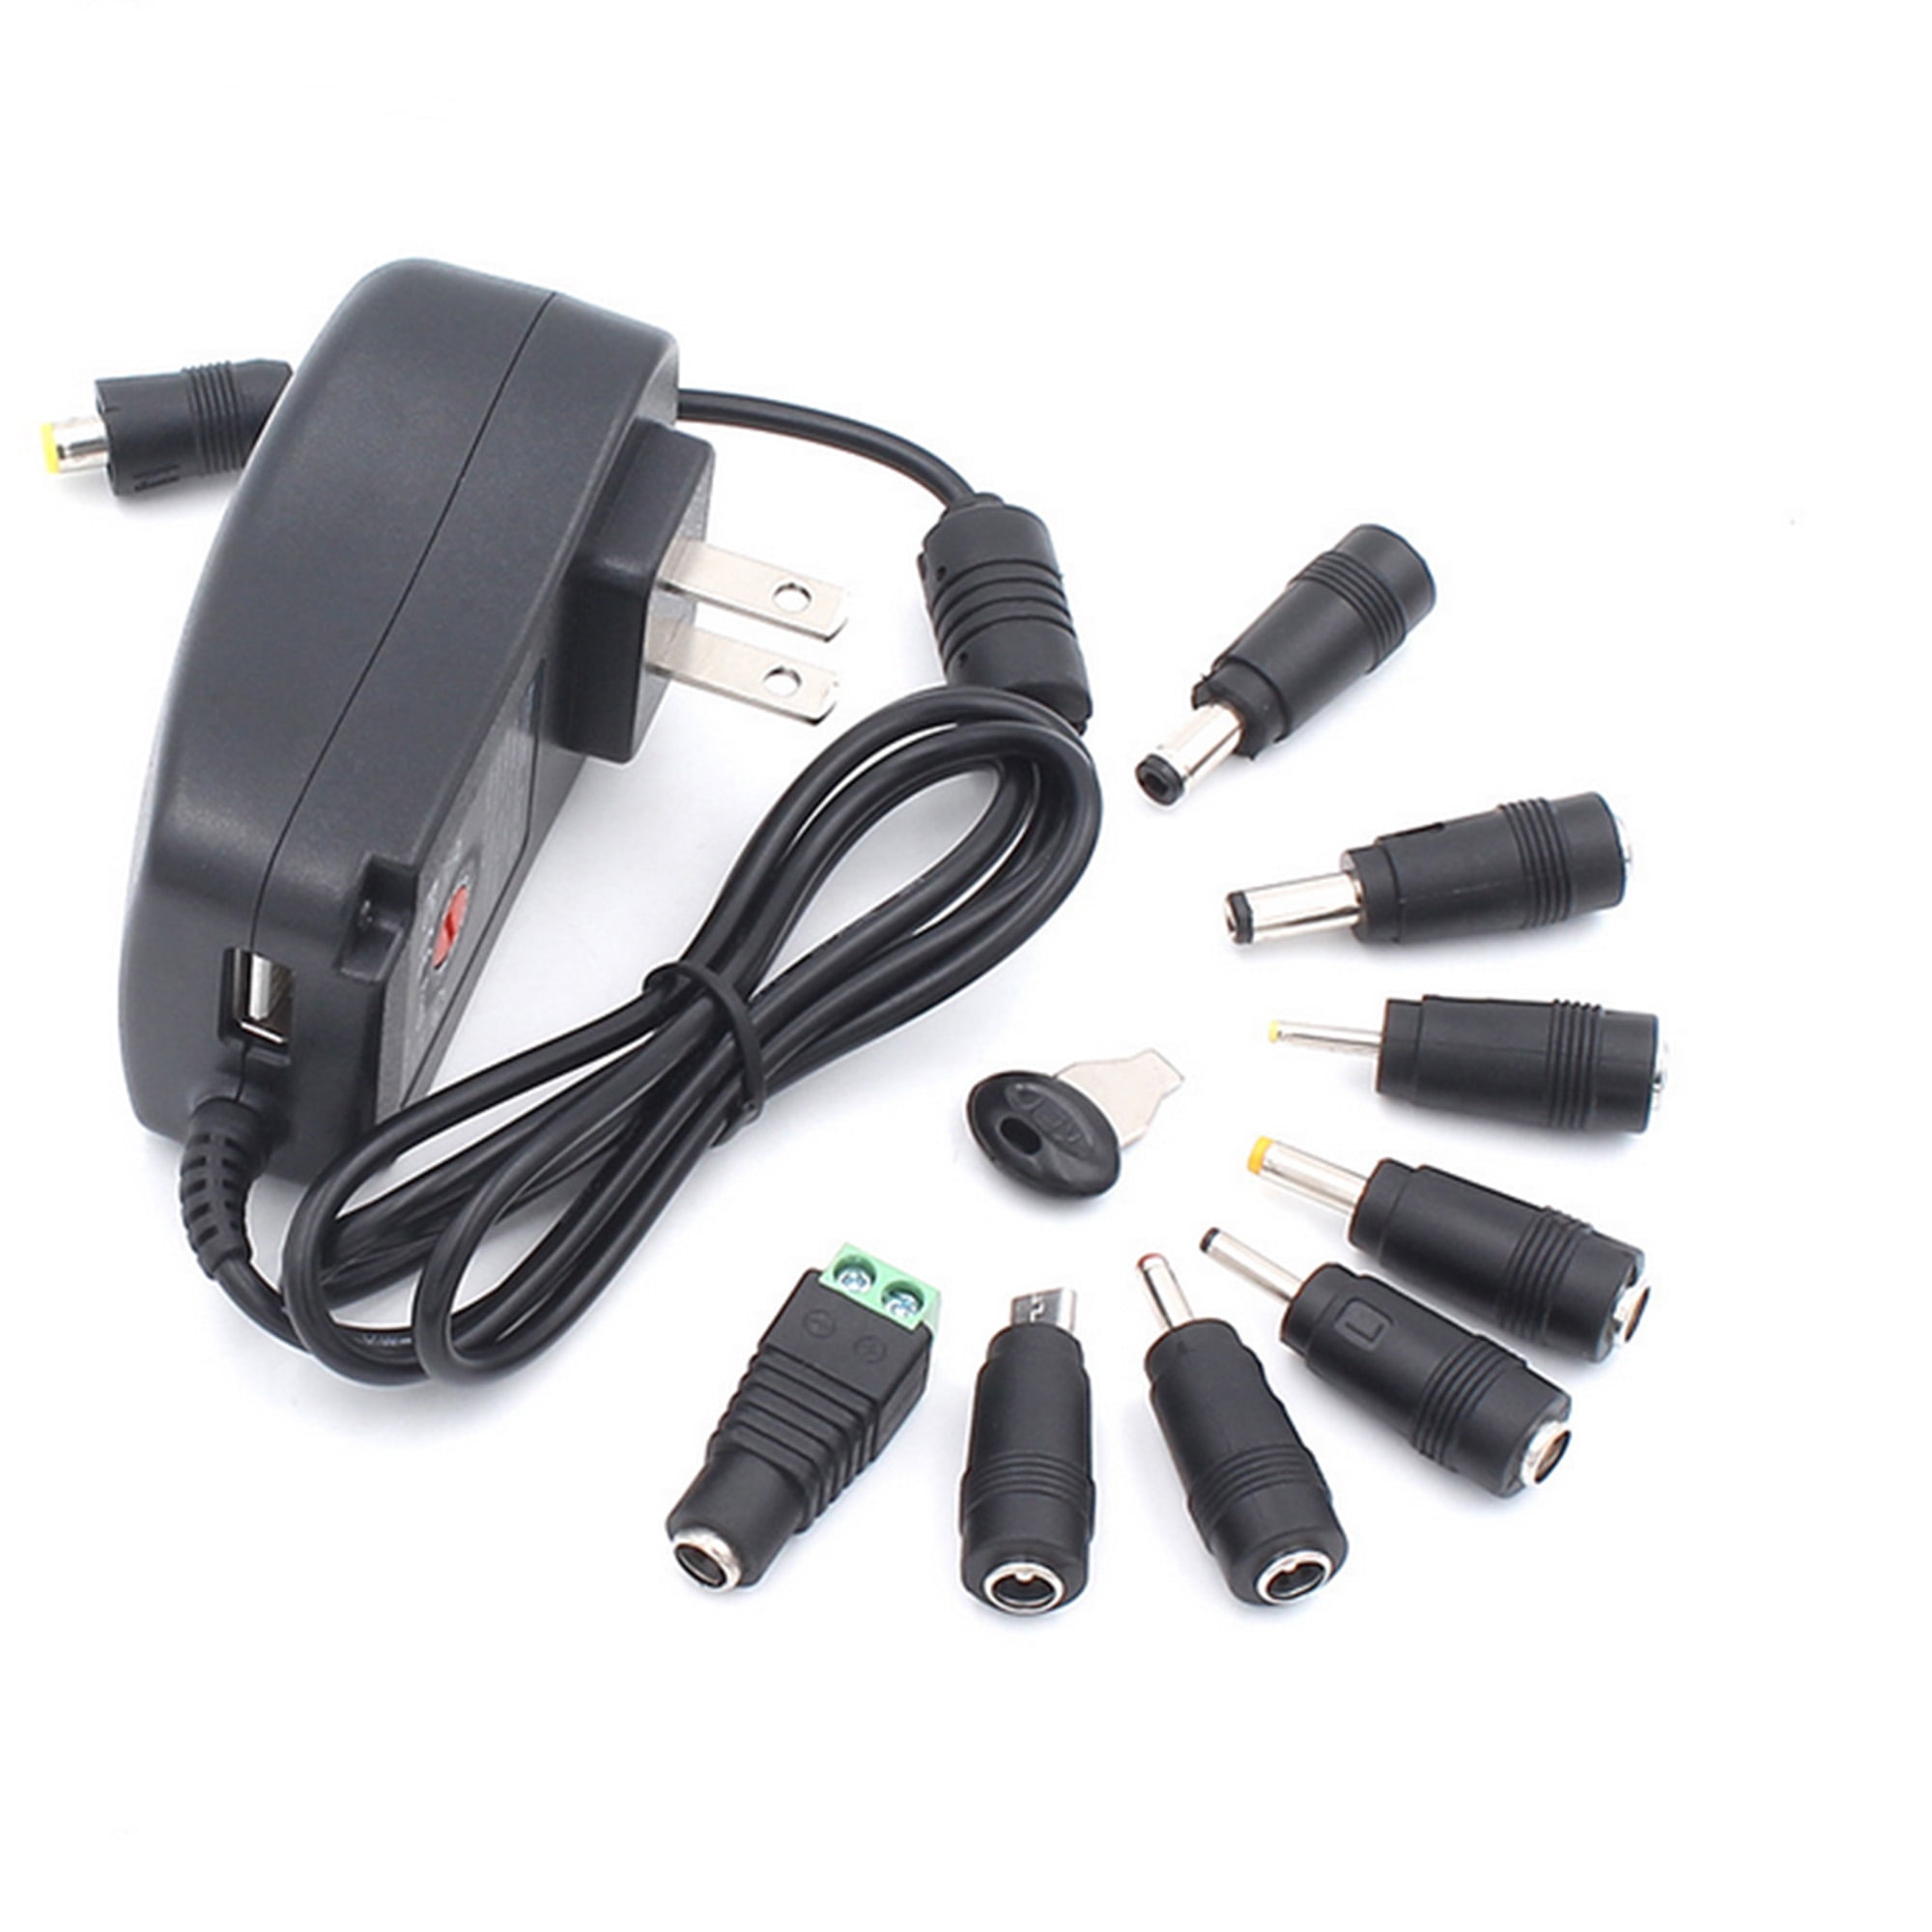 30W 3V-12V Regulated Multi Voltage Universal AC/DC Adapter Switching Power L9T1 